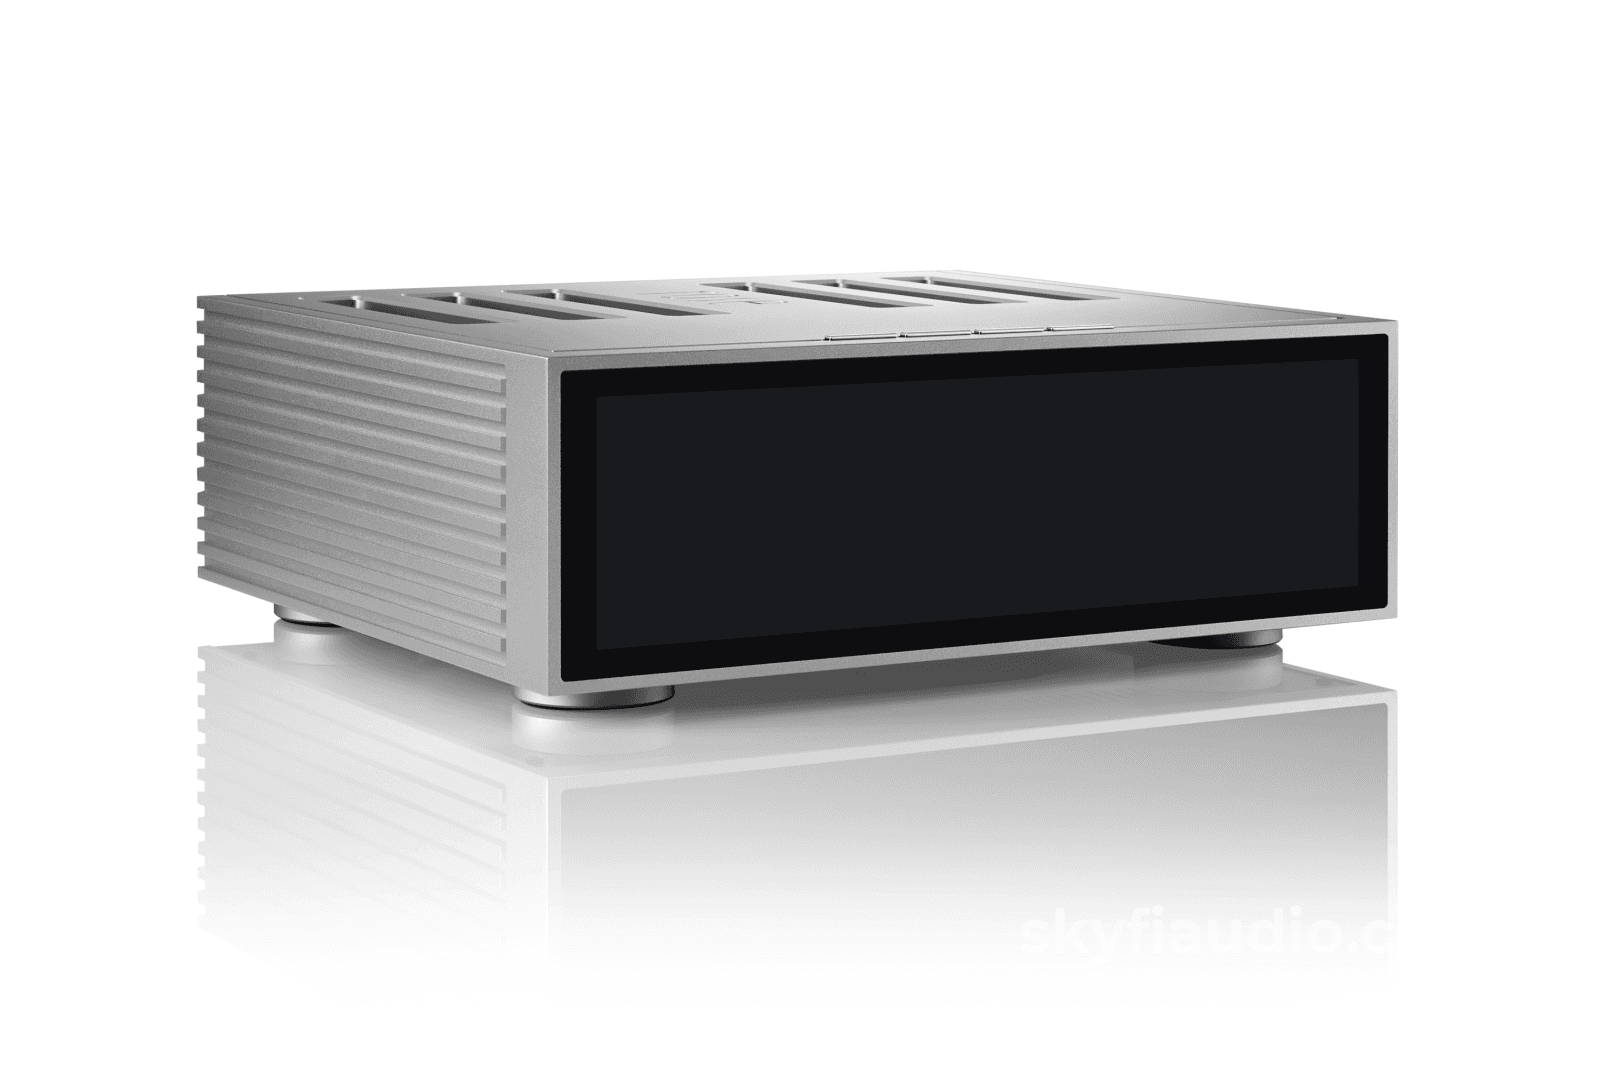 Rs520 Wireless Network Streamer & Integrated Amplifier